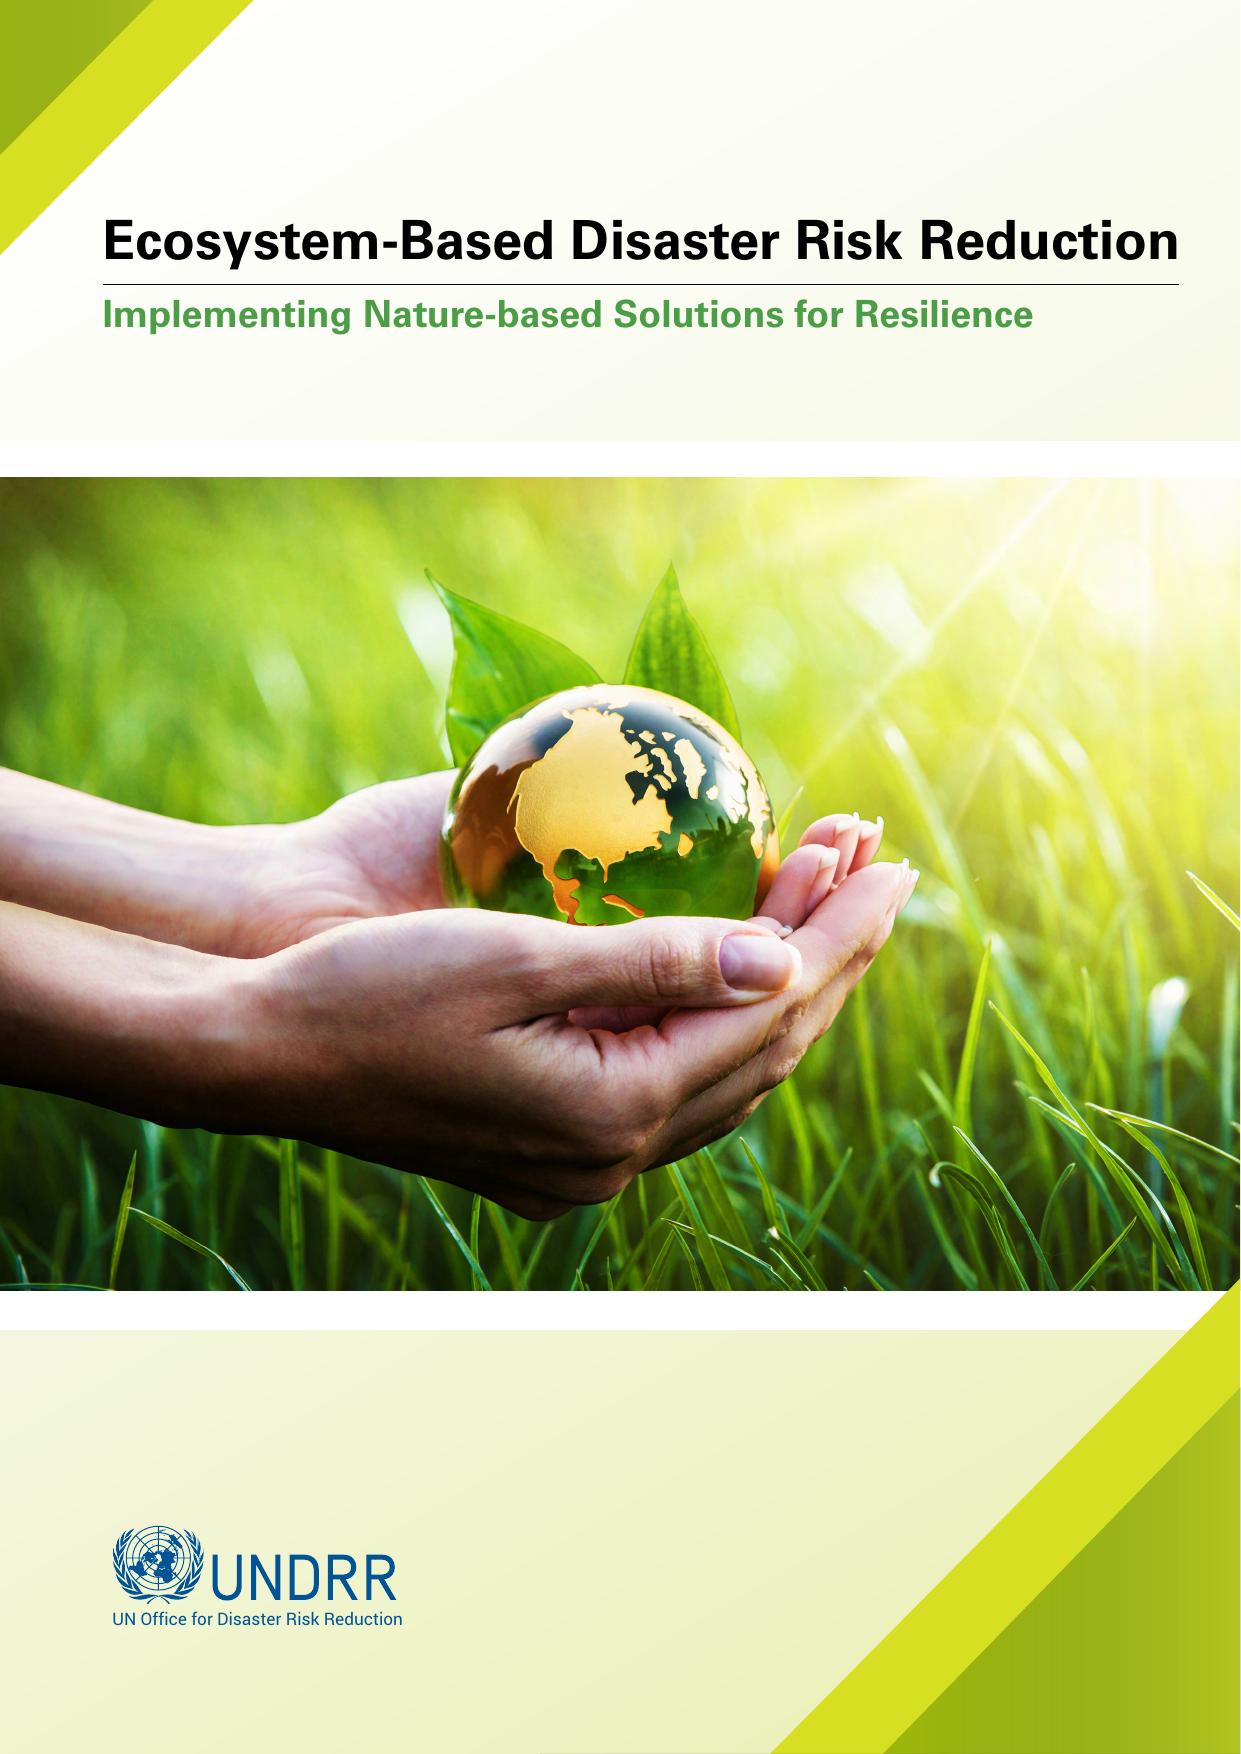 UNDRR Asia-Pacific Ecosystem-Based Disaster Risk Reduction Implementing Nature-based Solutions for Resilience (1)